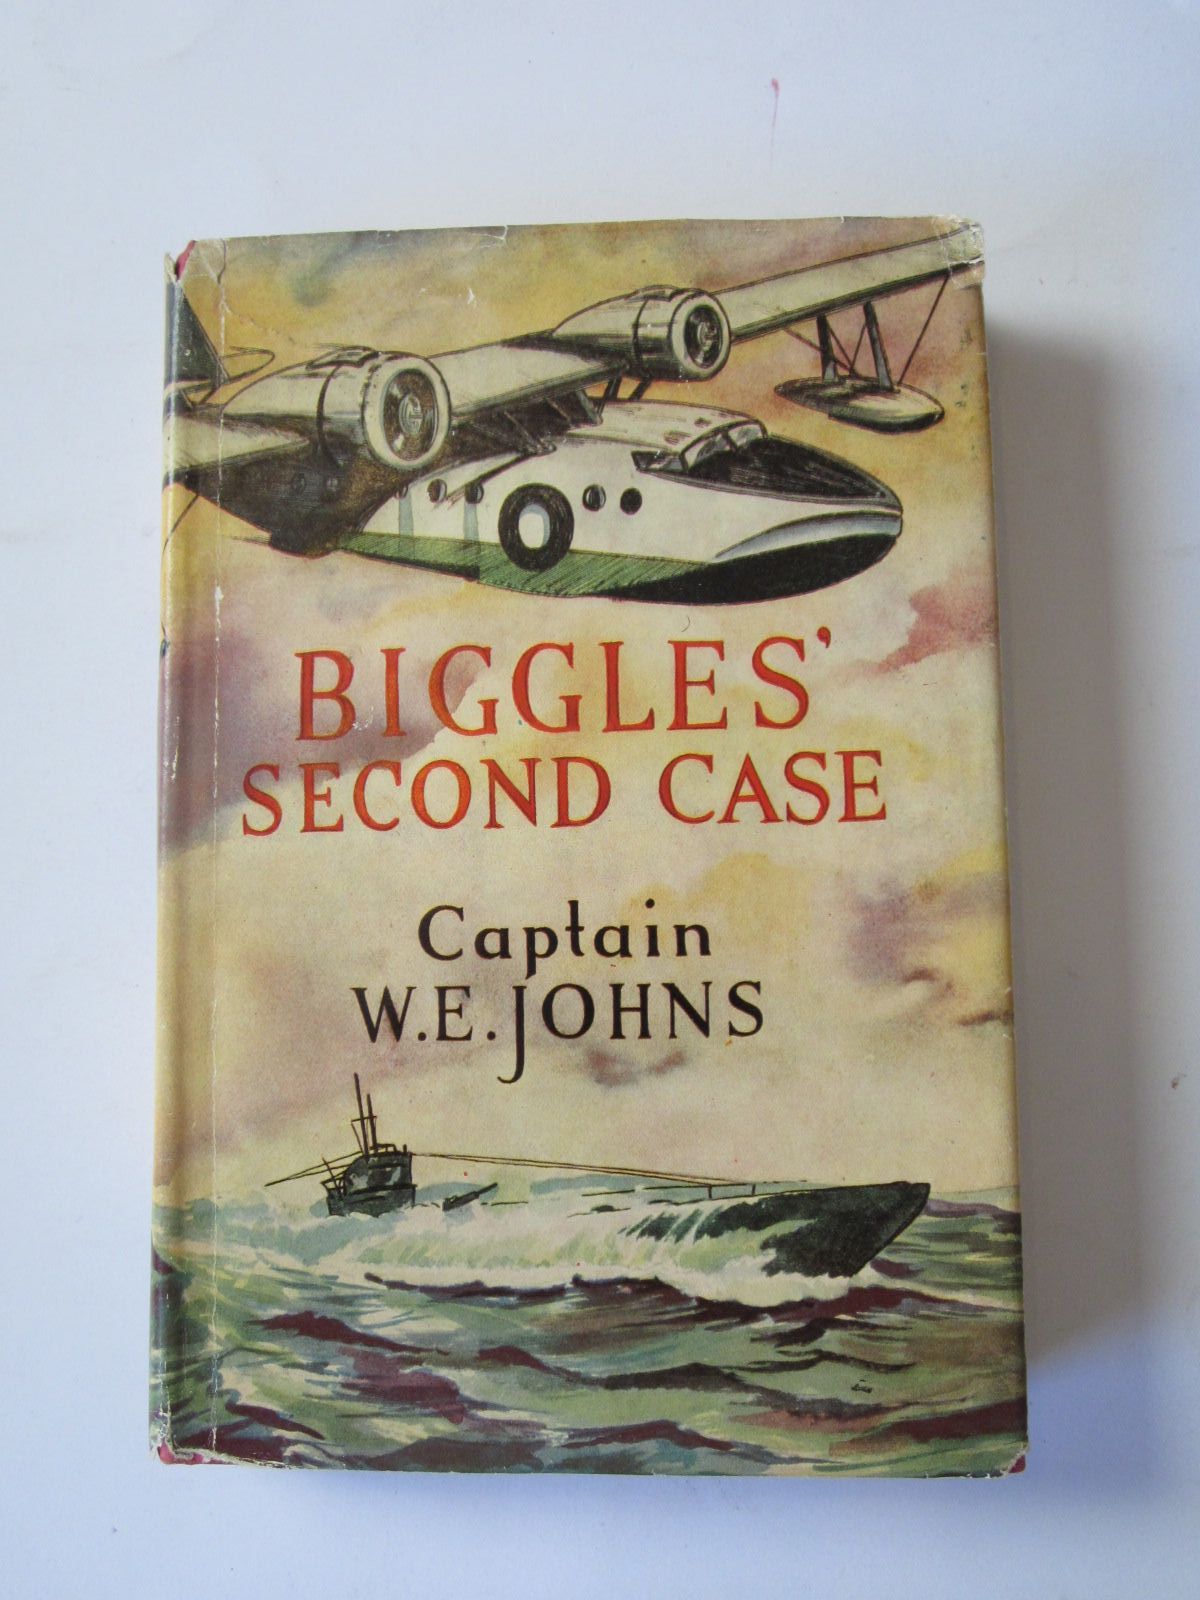 Cover of BIGGLES' SECOND CASE by W.E. Johns